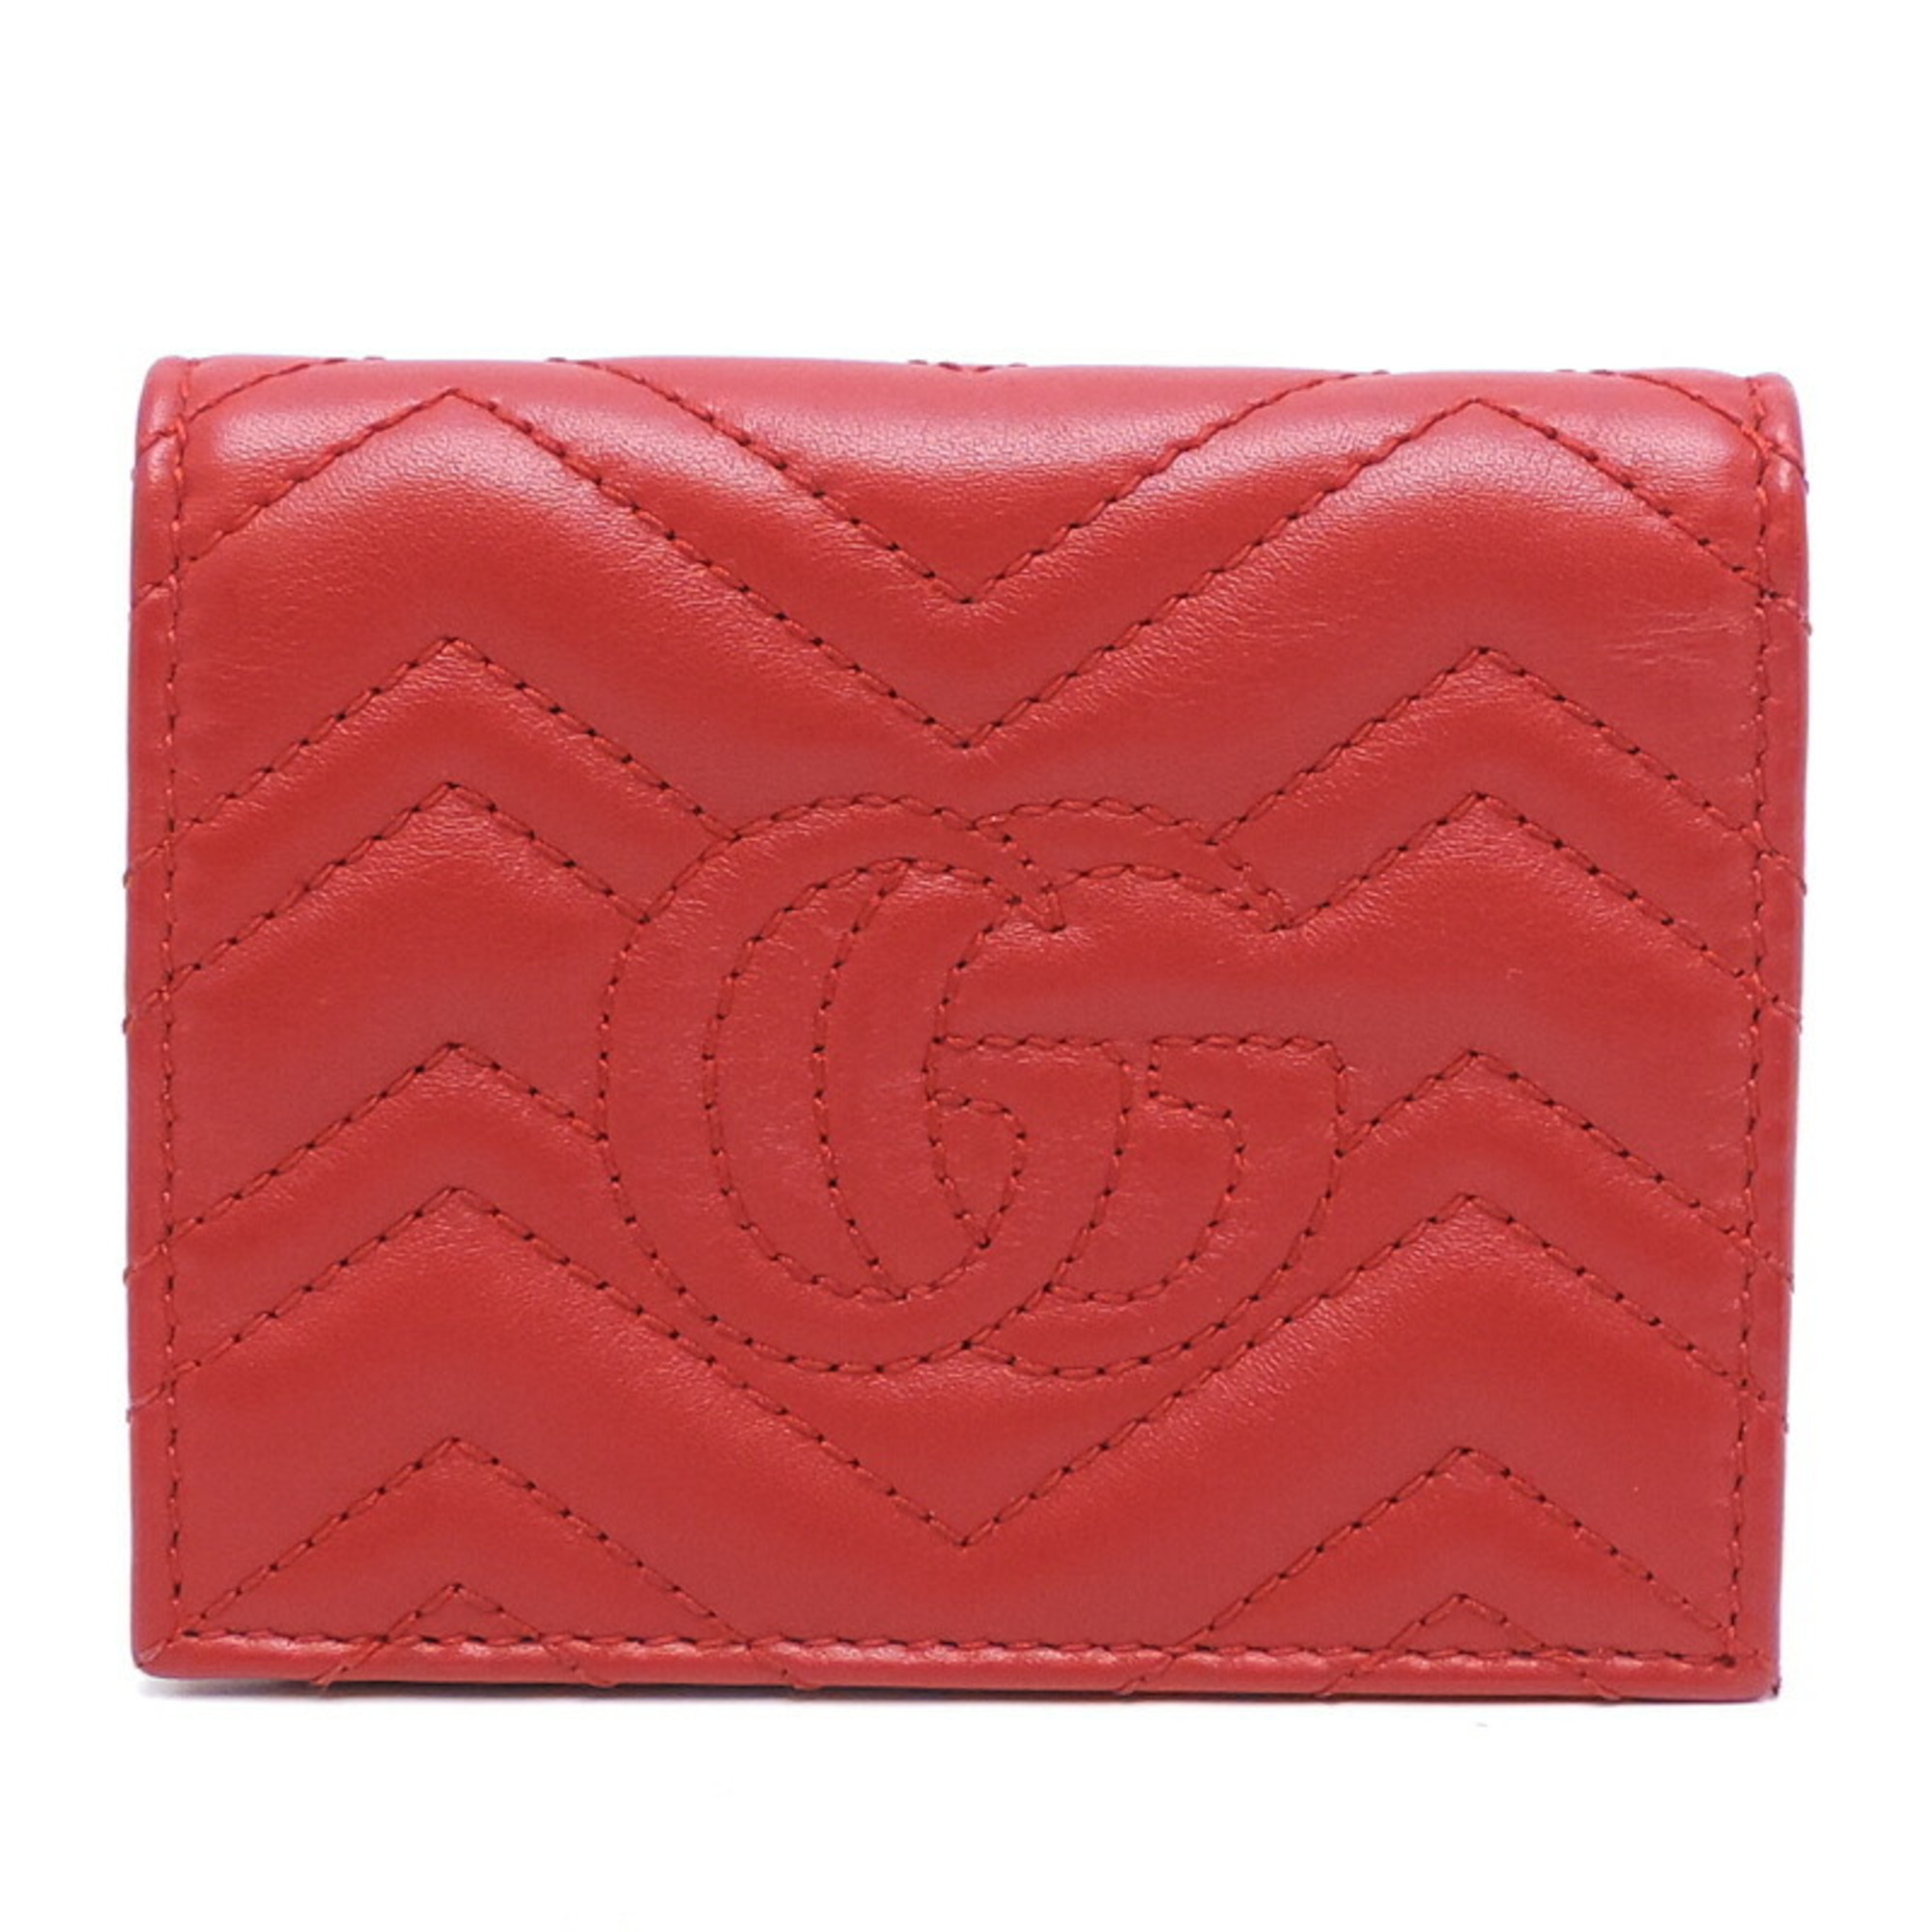 Gucci GG Marmont Billfold Women's Bifold Wallet 443125 Leather Red